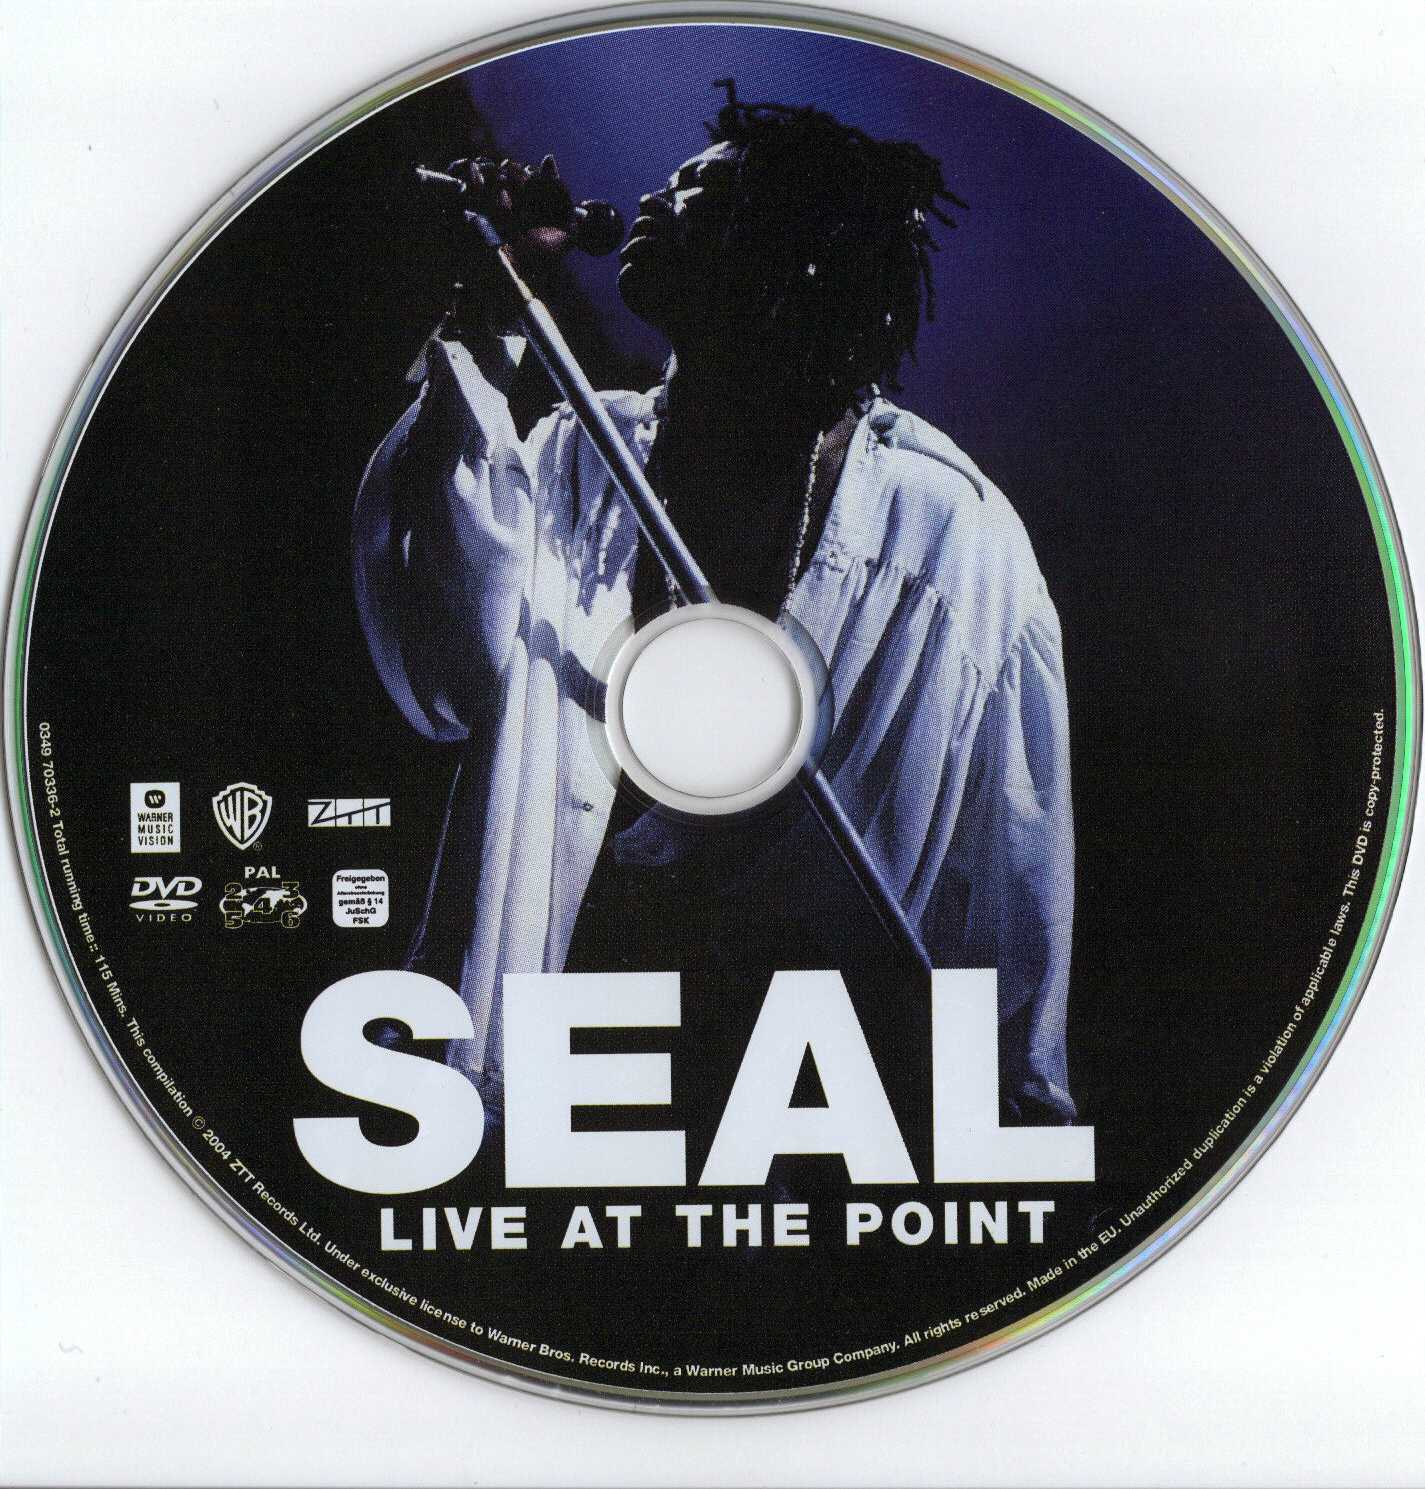 Seal live at the point